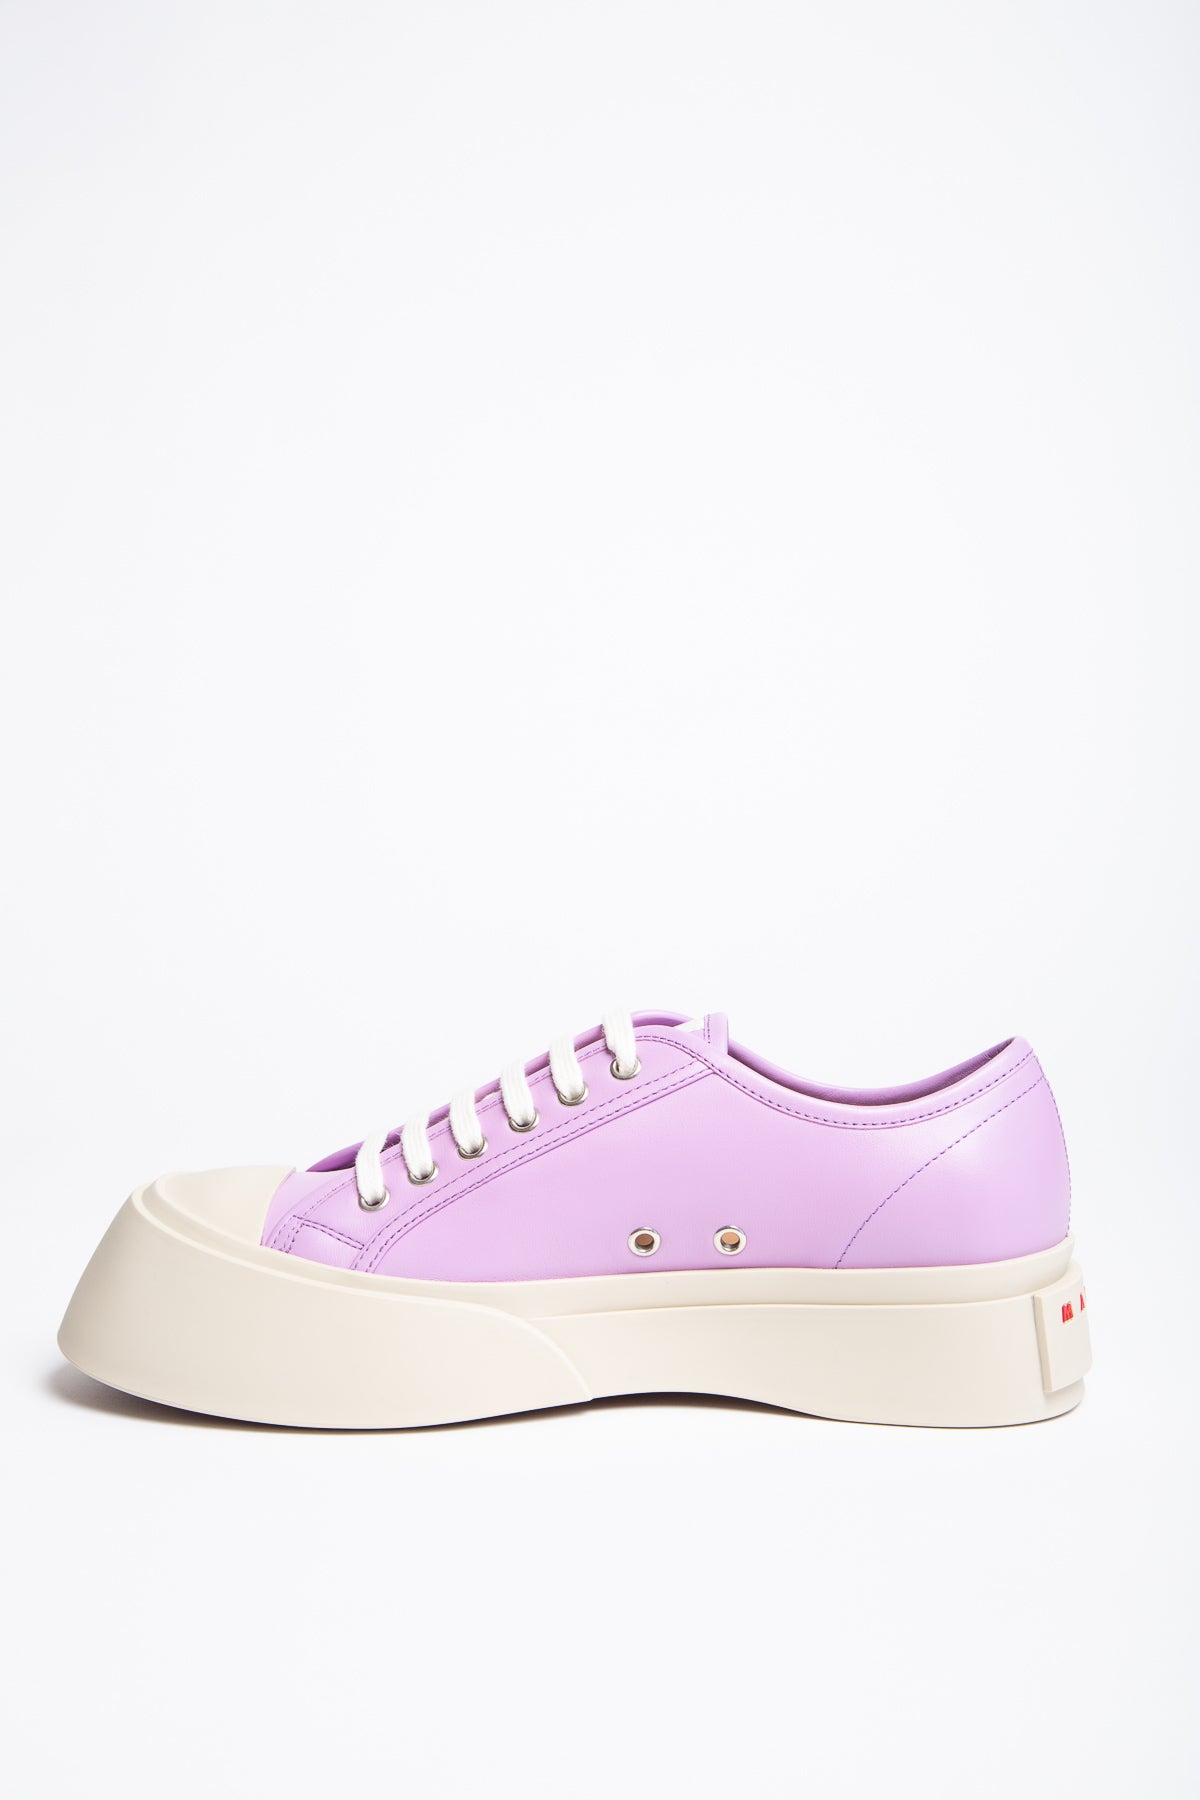 MARNI | PABLO LACE-UP SNEAKERS